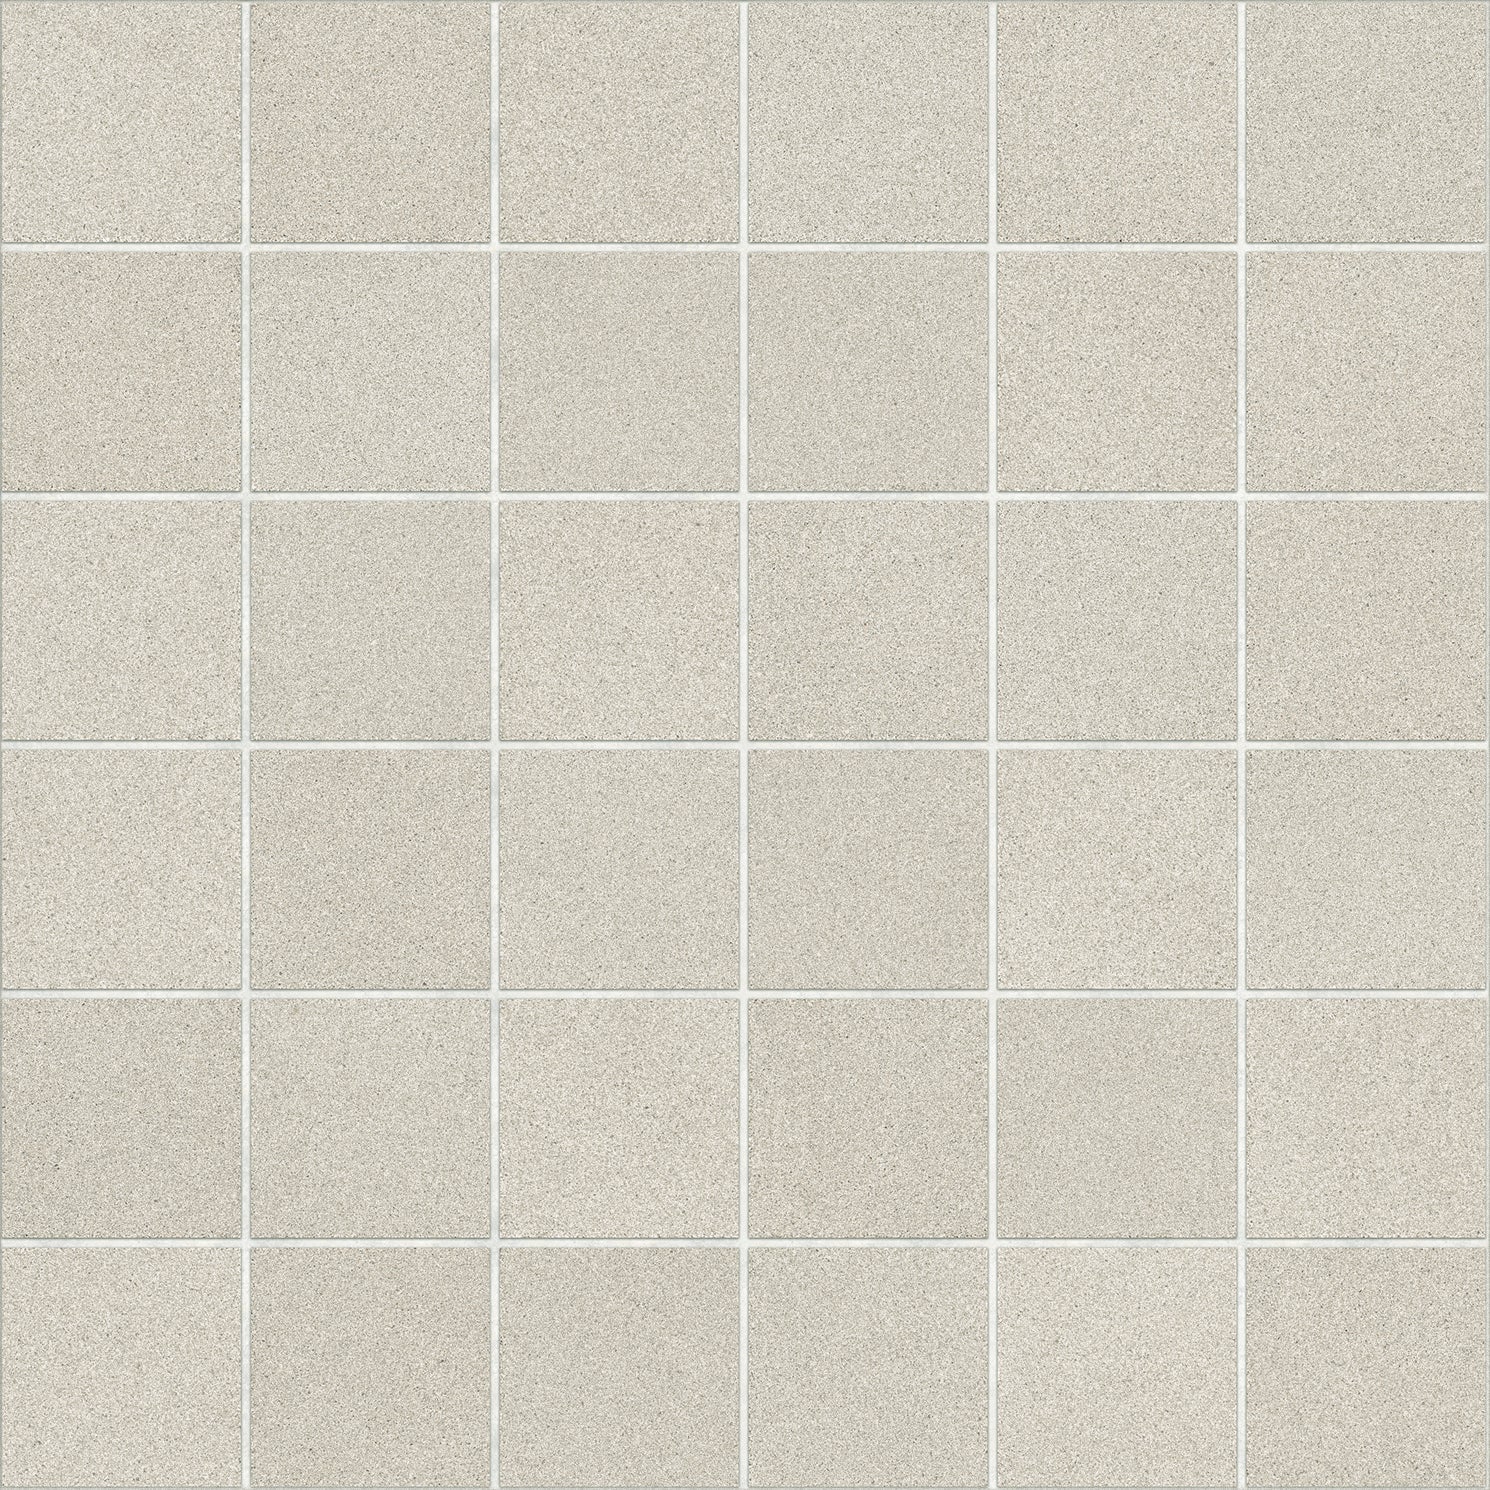 landmark 9mm masterplan precious ivory straight stack 2x2 mosaic 12x12x9mm matte rectified porcelain tile distributed by surface group international